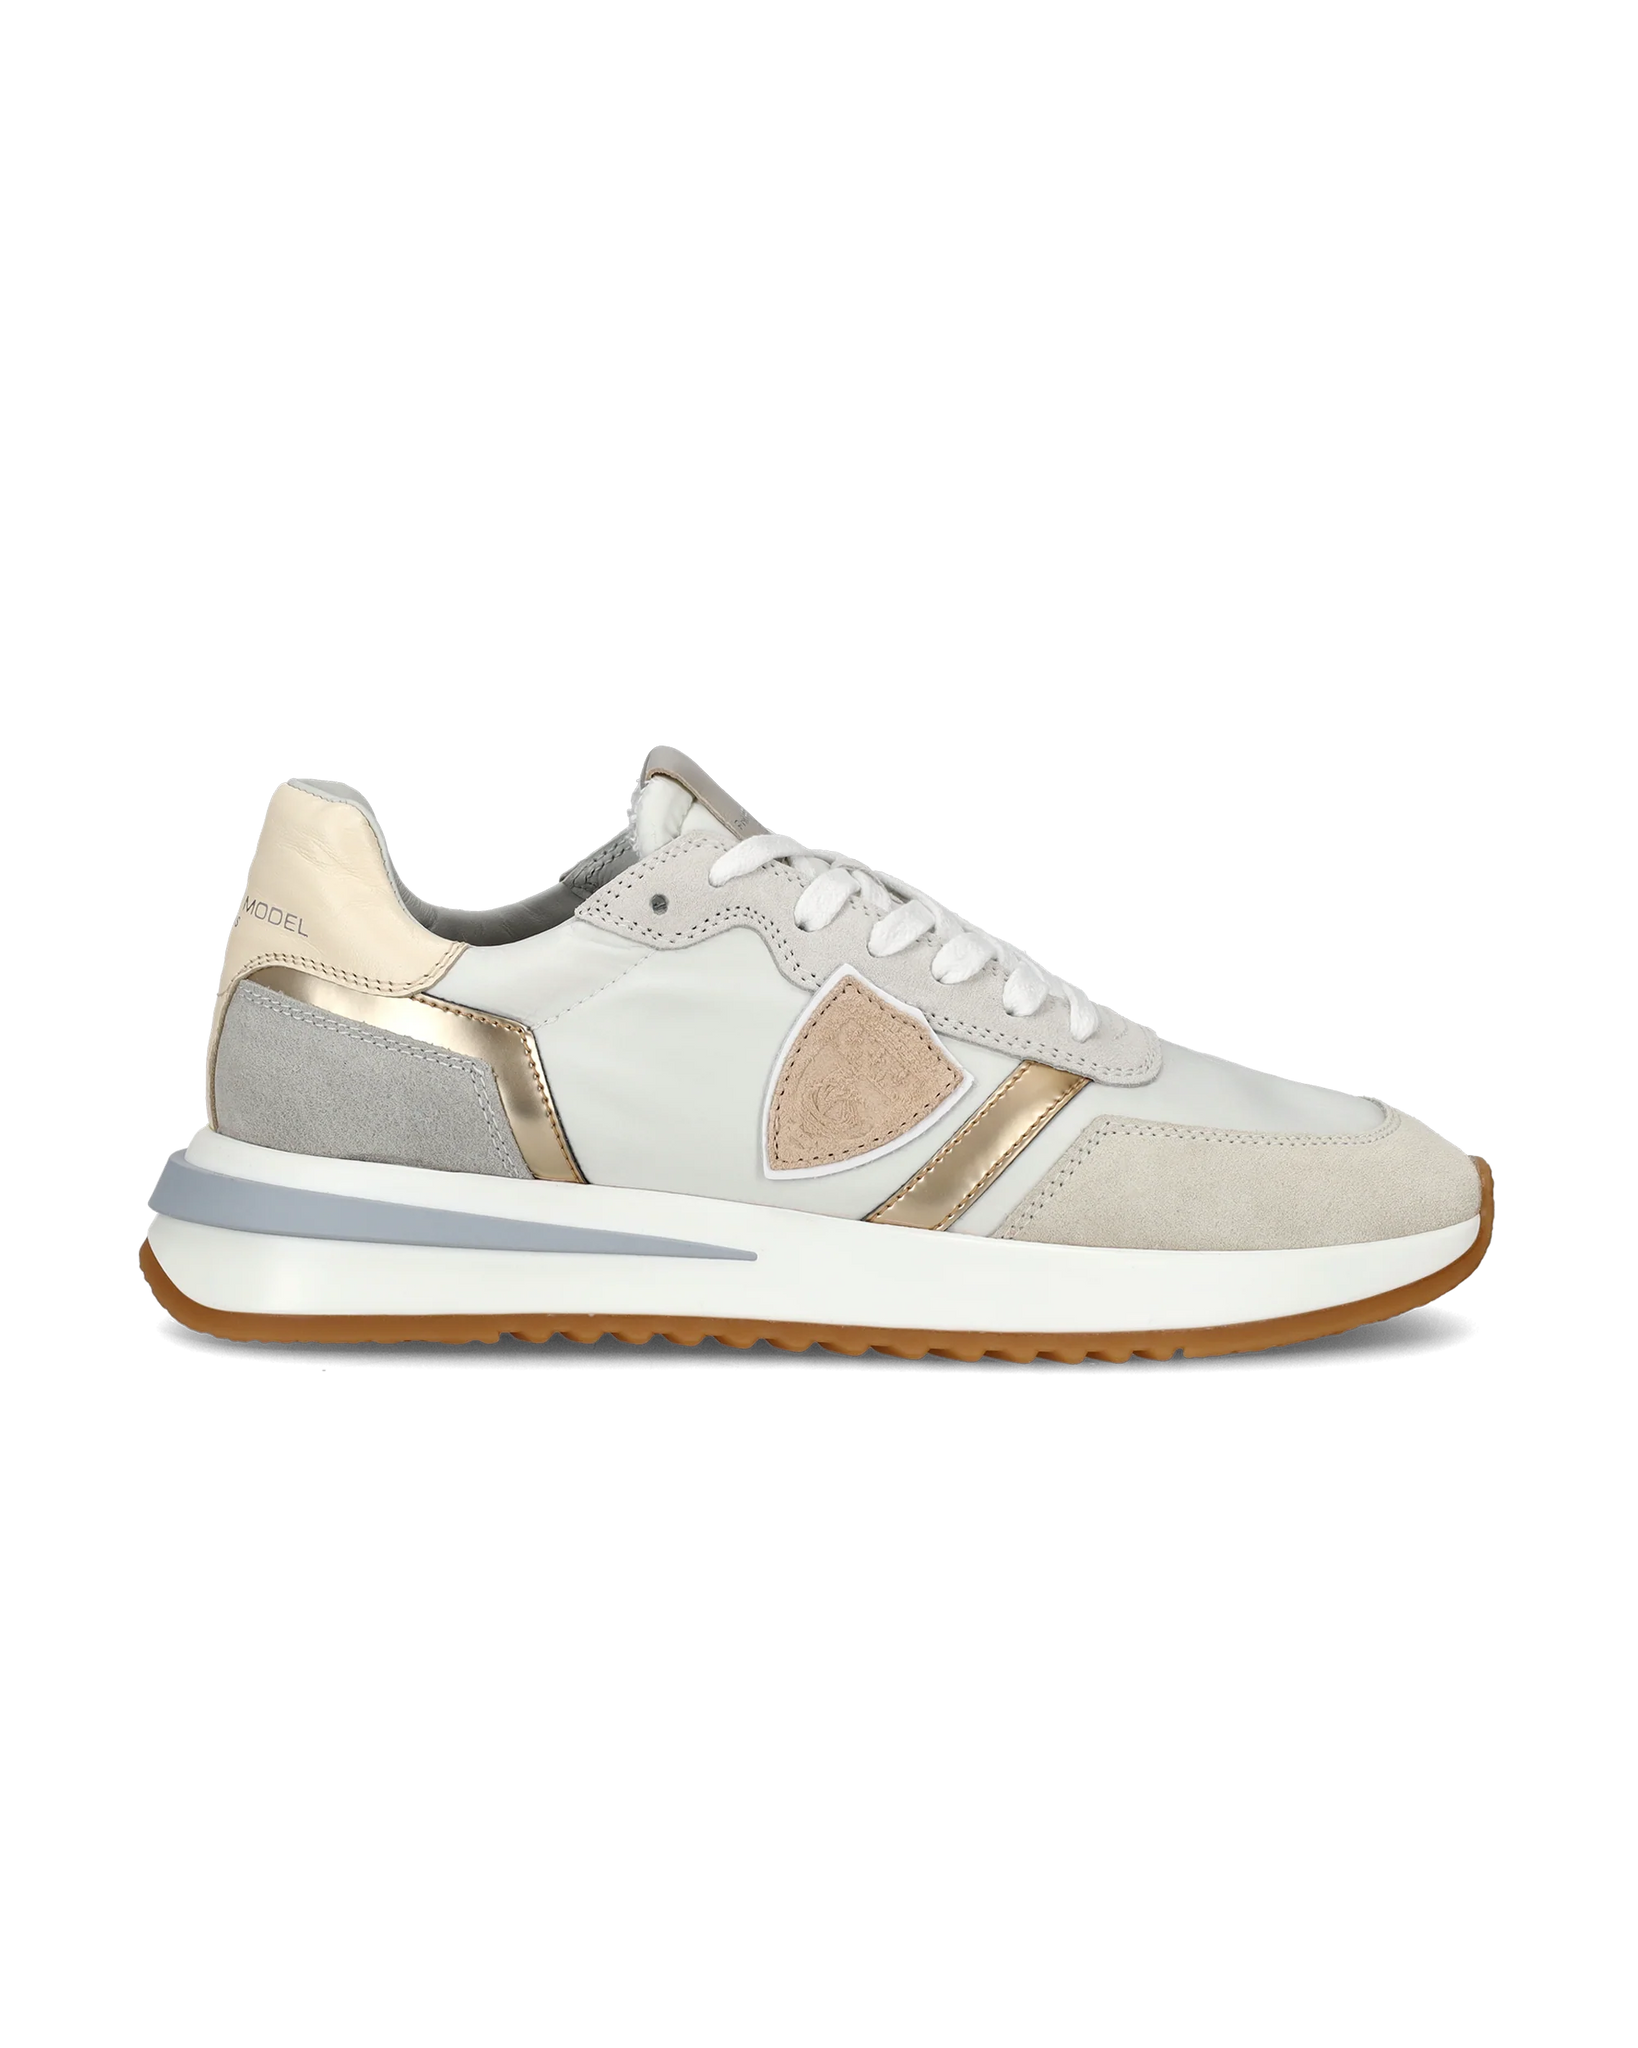 Philippe Model - Women’s Tropez 2.1 Low-Top Sneakers - White & Gold